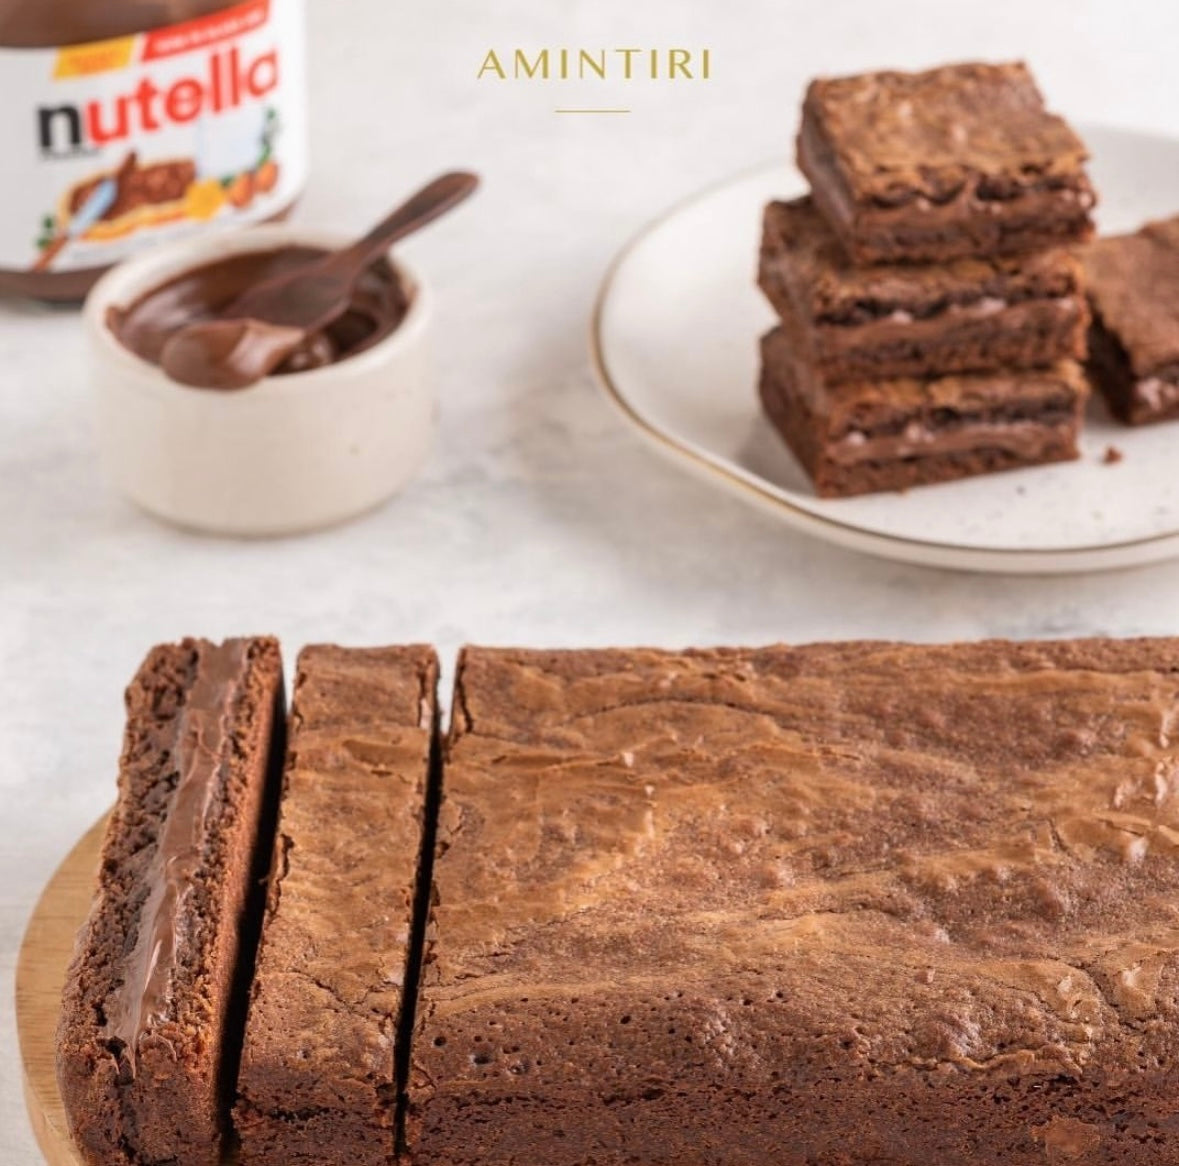 Amintiri - Played dress up with out Dark Chocolate... | Facebook